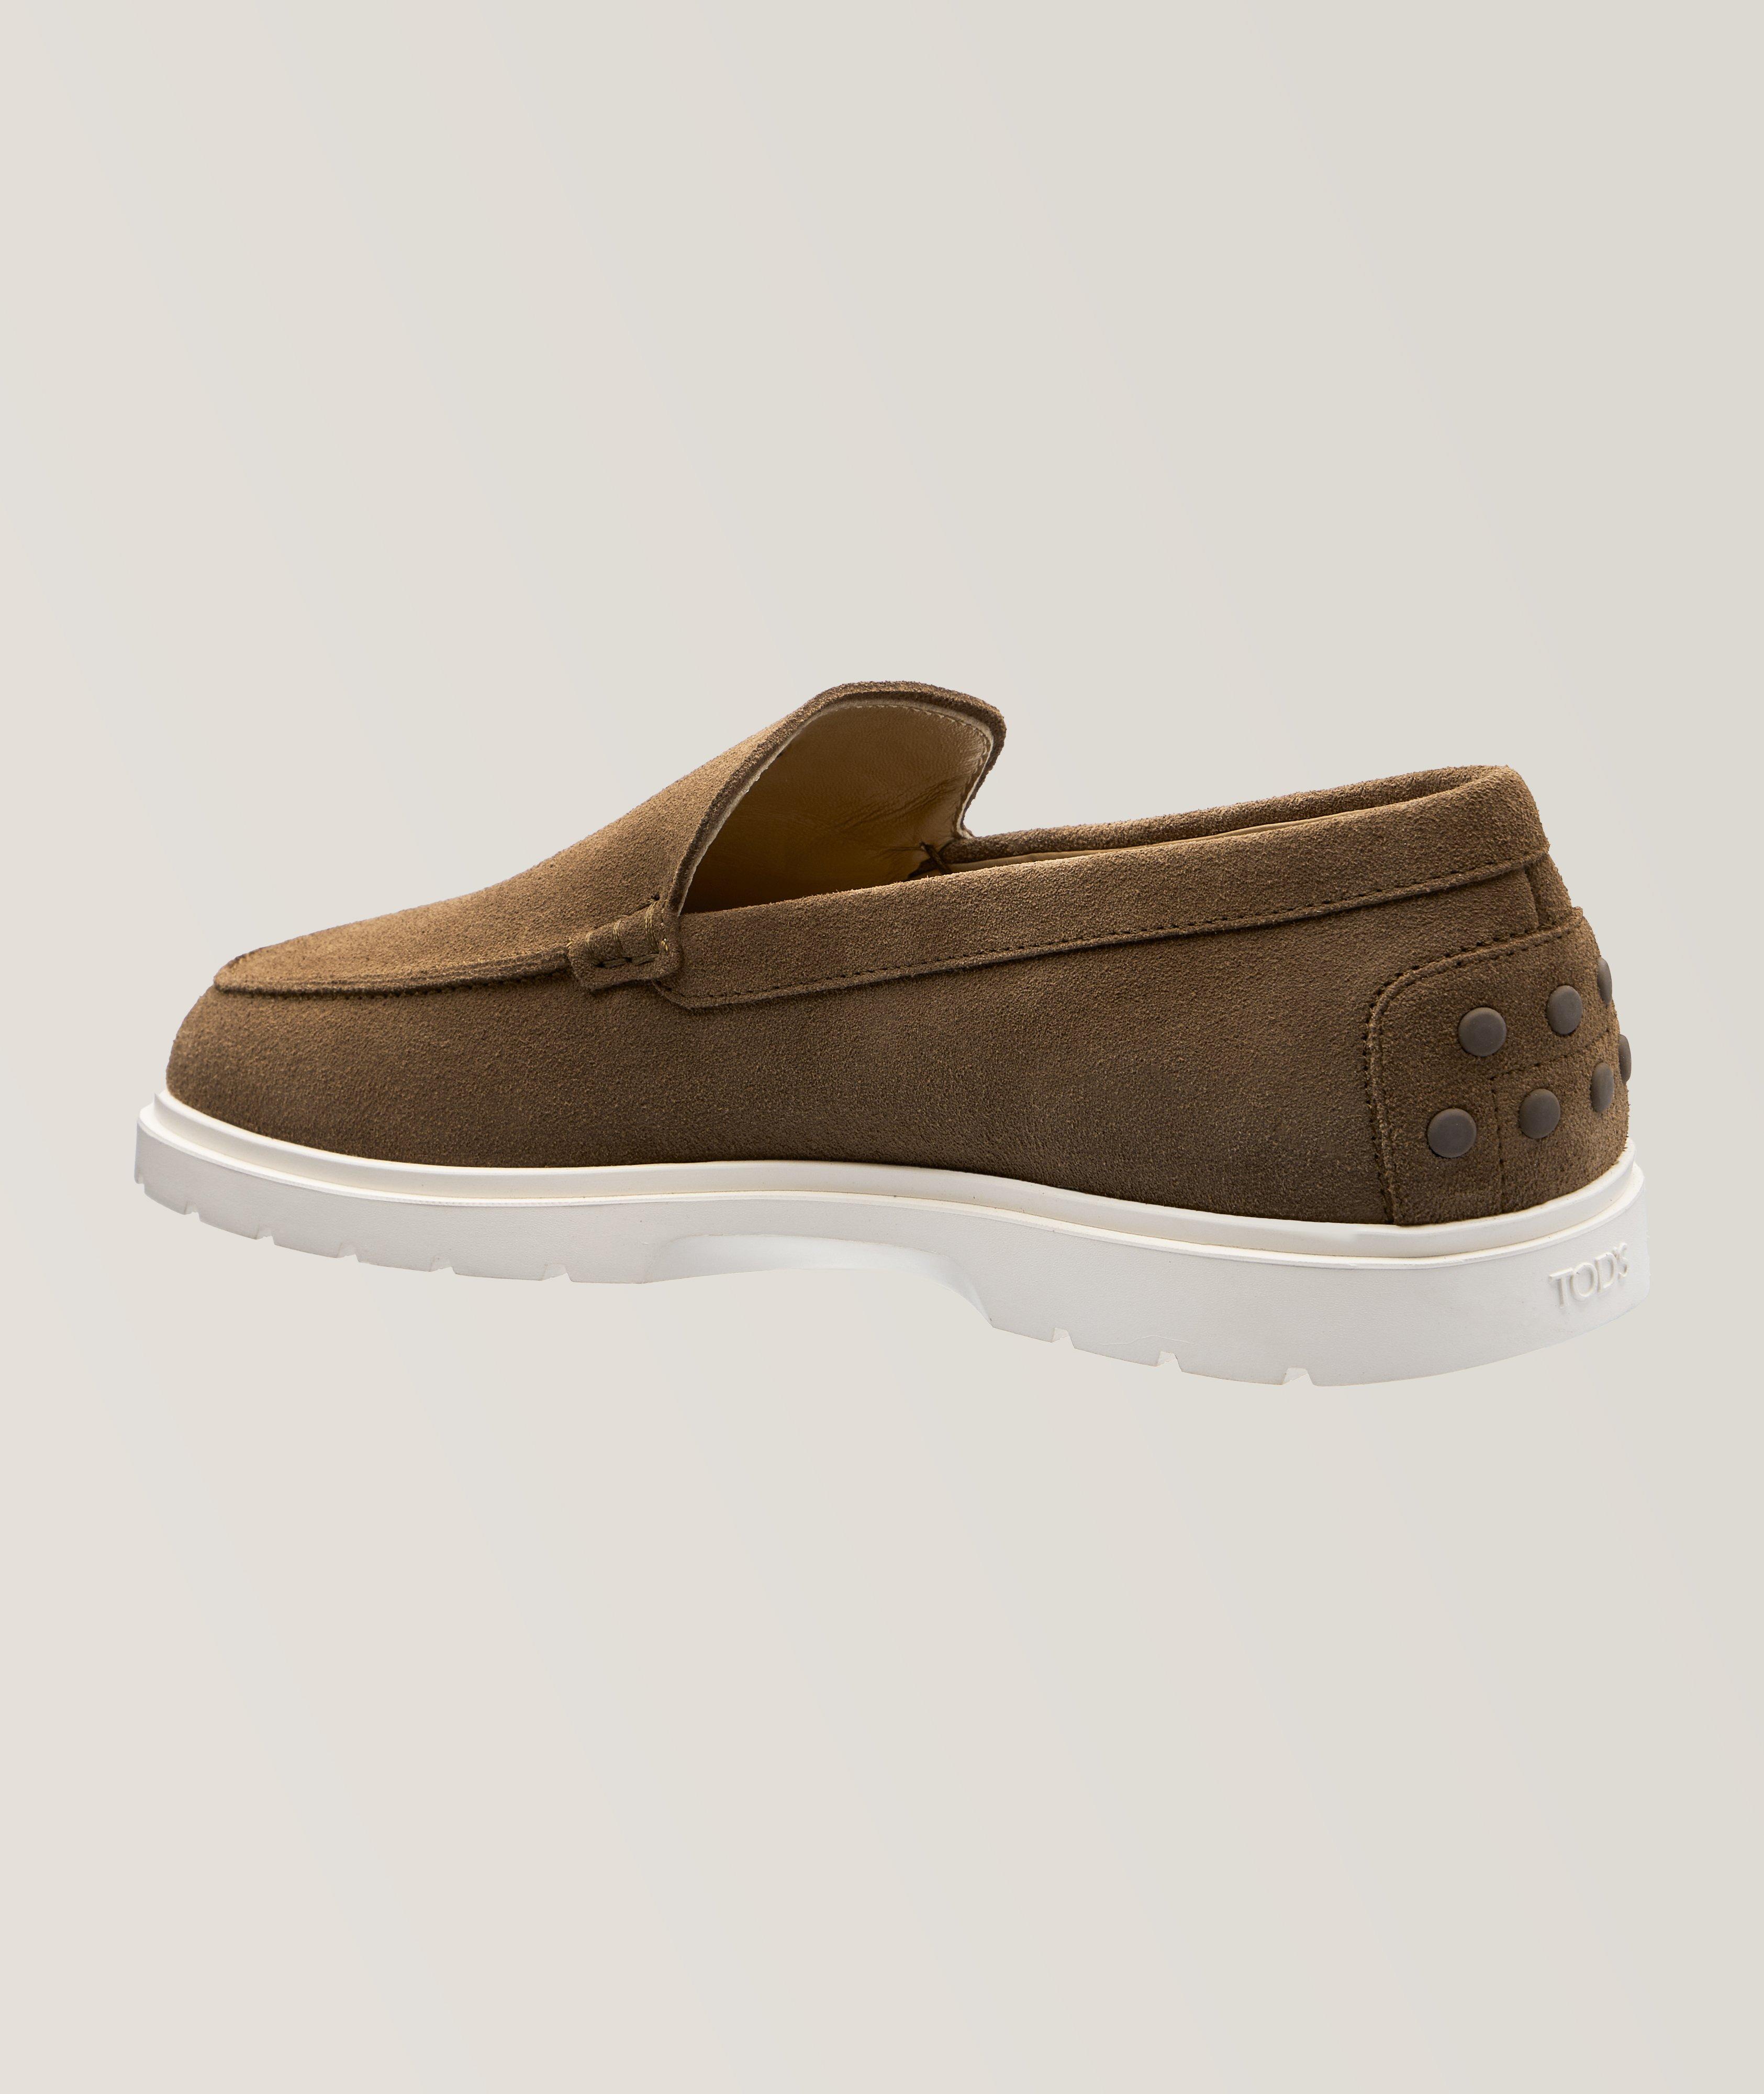 Suede Slipper Loafers  image 1